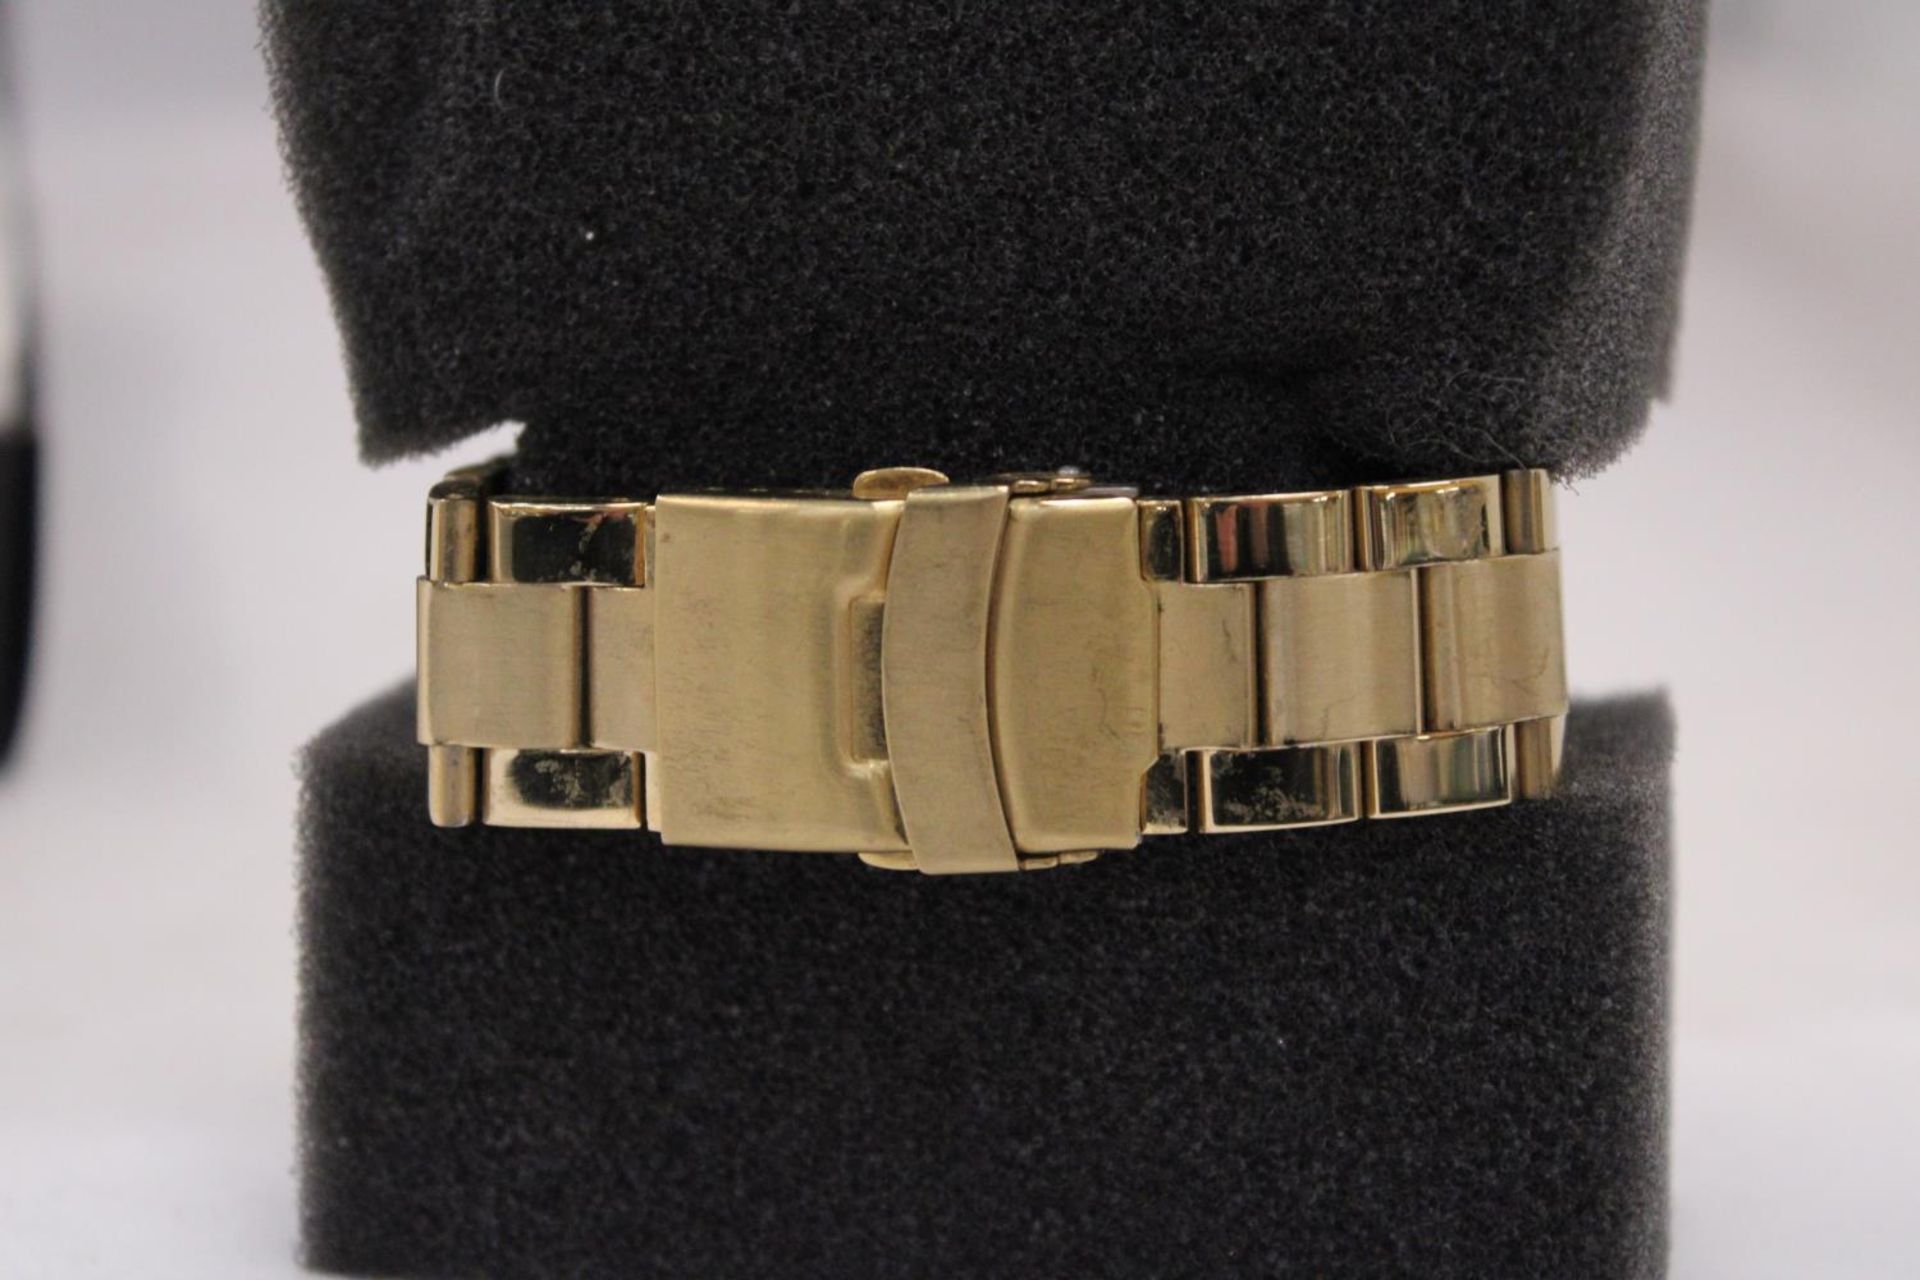 A MICHAEL KORS STYLE GOLD COLOURED WATCH IN PRESENTATION BOX - Image 4 of 5